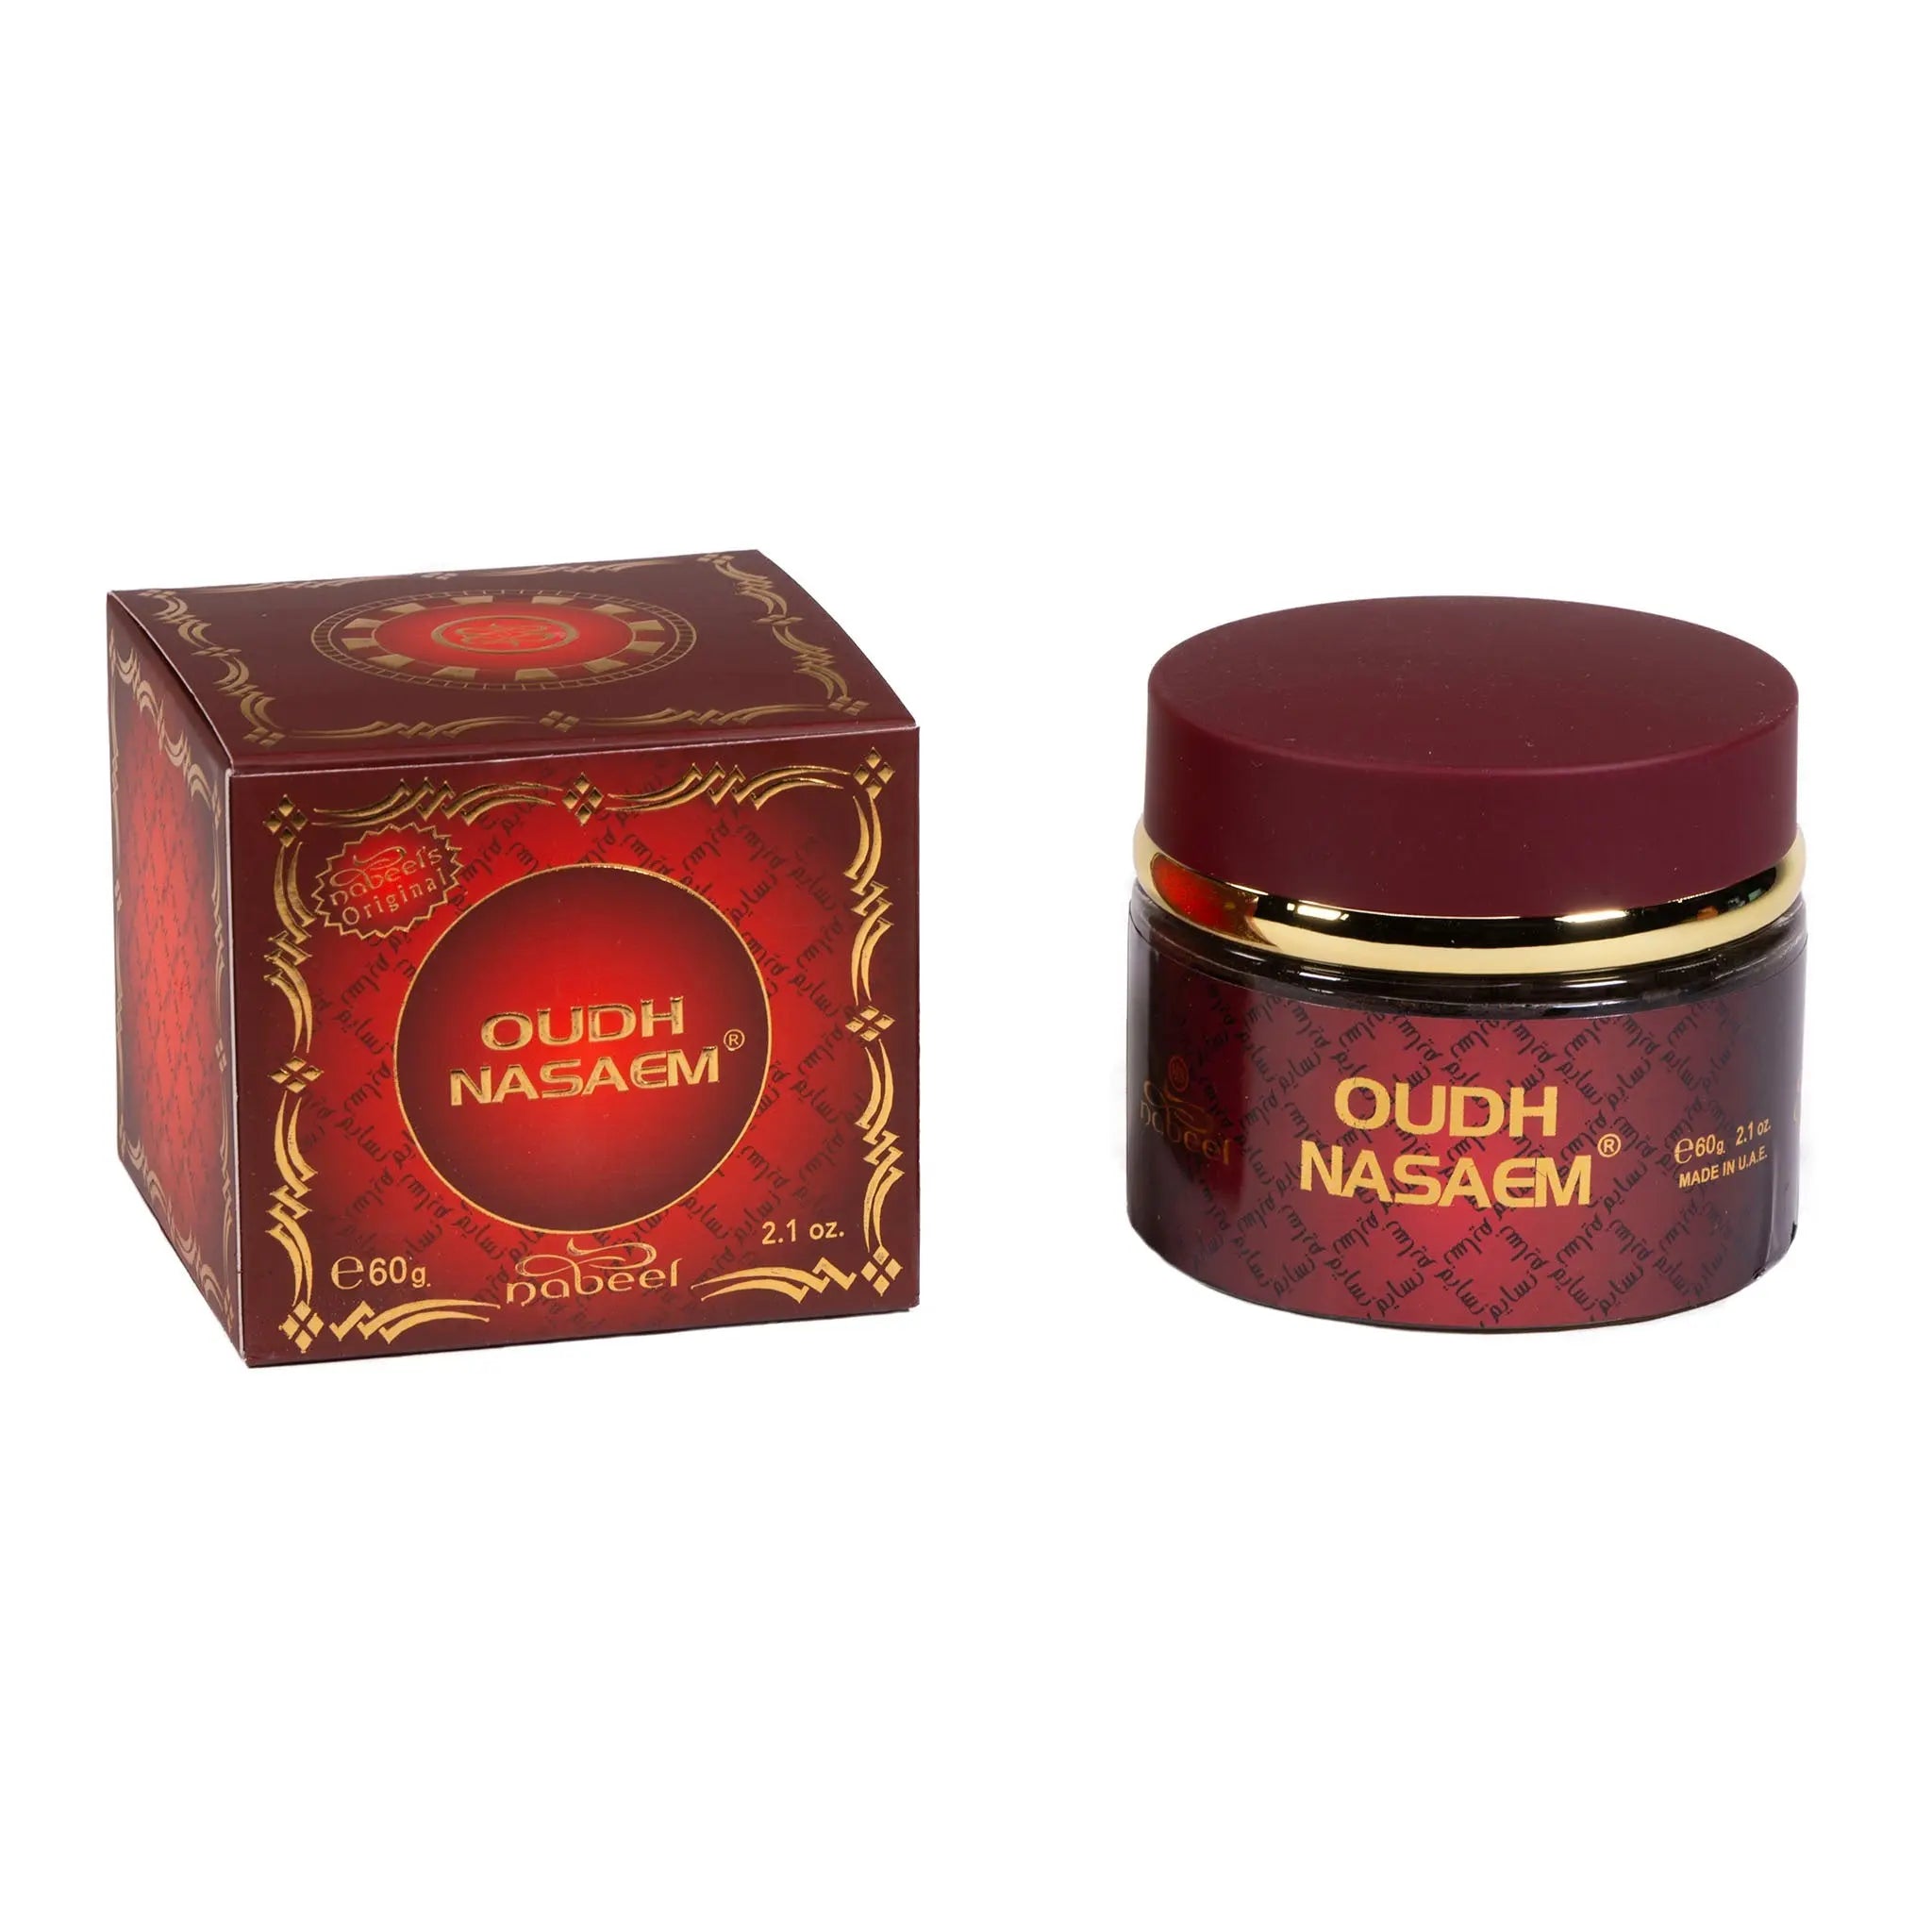 The image displays a fragrance product with its packaging on a white background. To the left is a cube-shaped box with a rich red background featuring ornate golden Arabic calligraphy and patterns. The front of the box has a circular label with the words "OUDH NASEEM" in large golden letters against a red backdrop, and below in smaller text is the brand "nabeel." This item appears to be a type of scented Oudh, commonly used in Middle Eastern regions as a perfume or for scenting rooms.